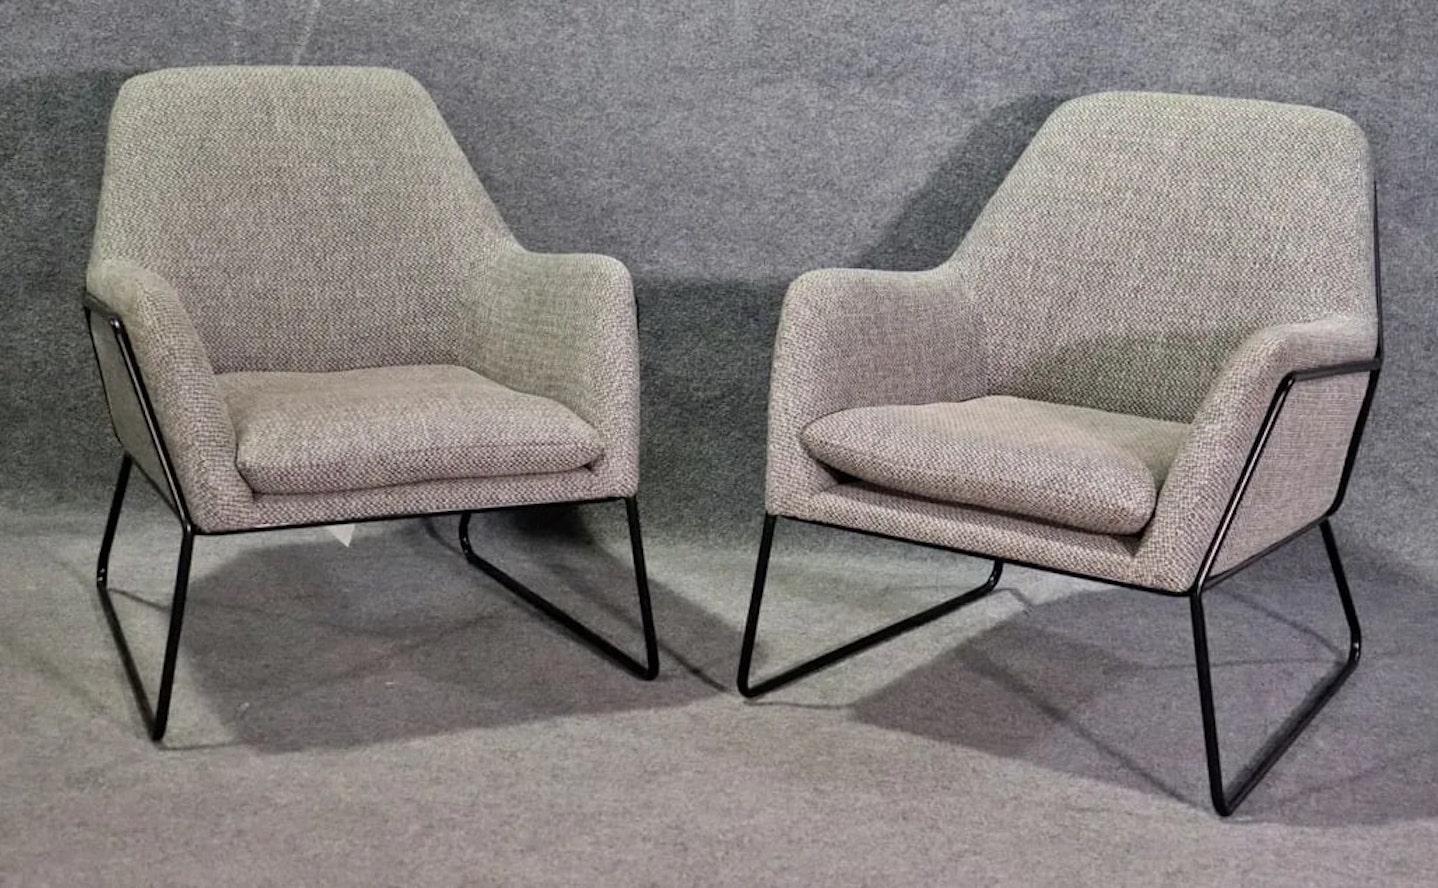 Pair of modern lounge chairs by Article with strong black iron frames and soft body.
Please confirm location NY or NJ